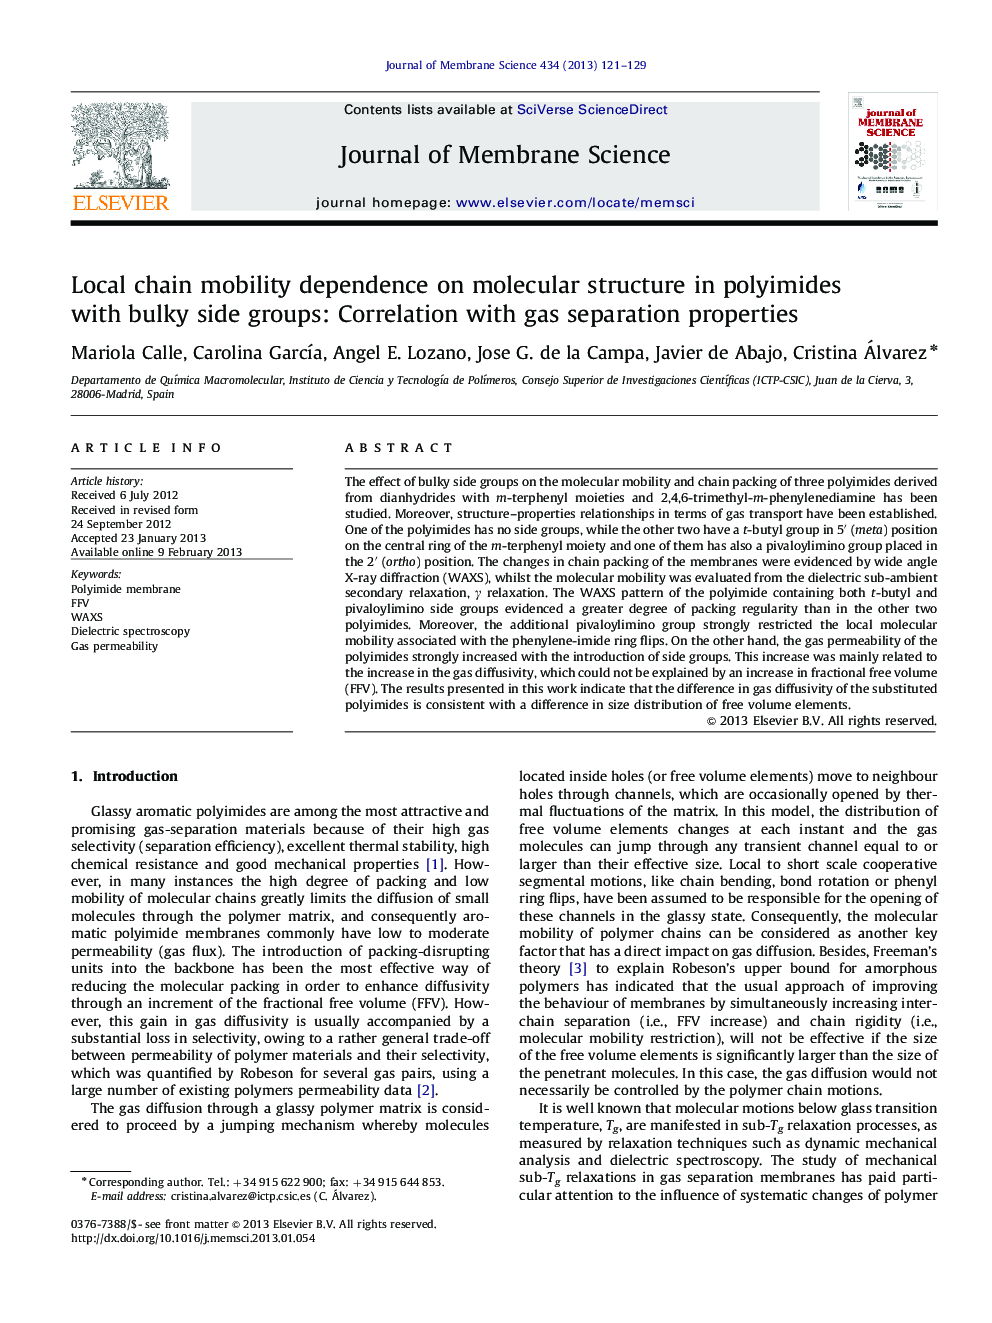 Local chain mobility dependence on molecular structure in polyimides with bulky side groups: Correlation with gas separation properties